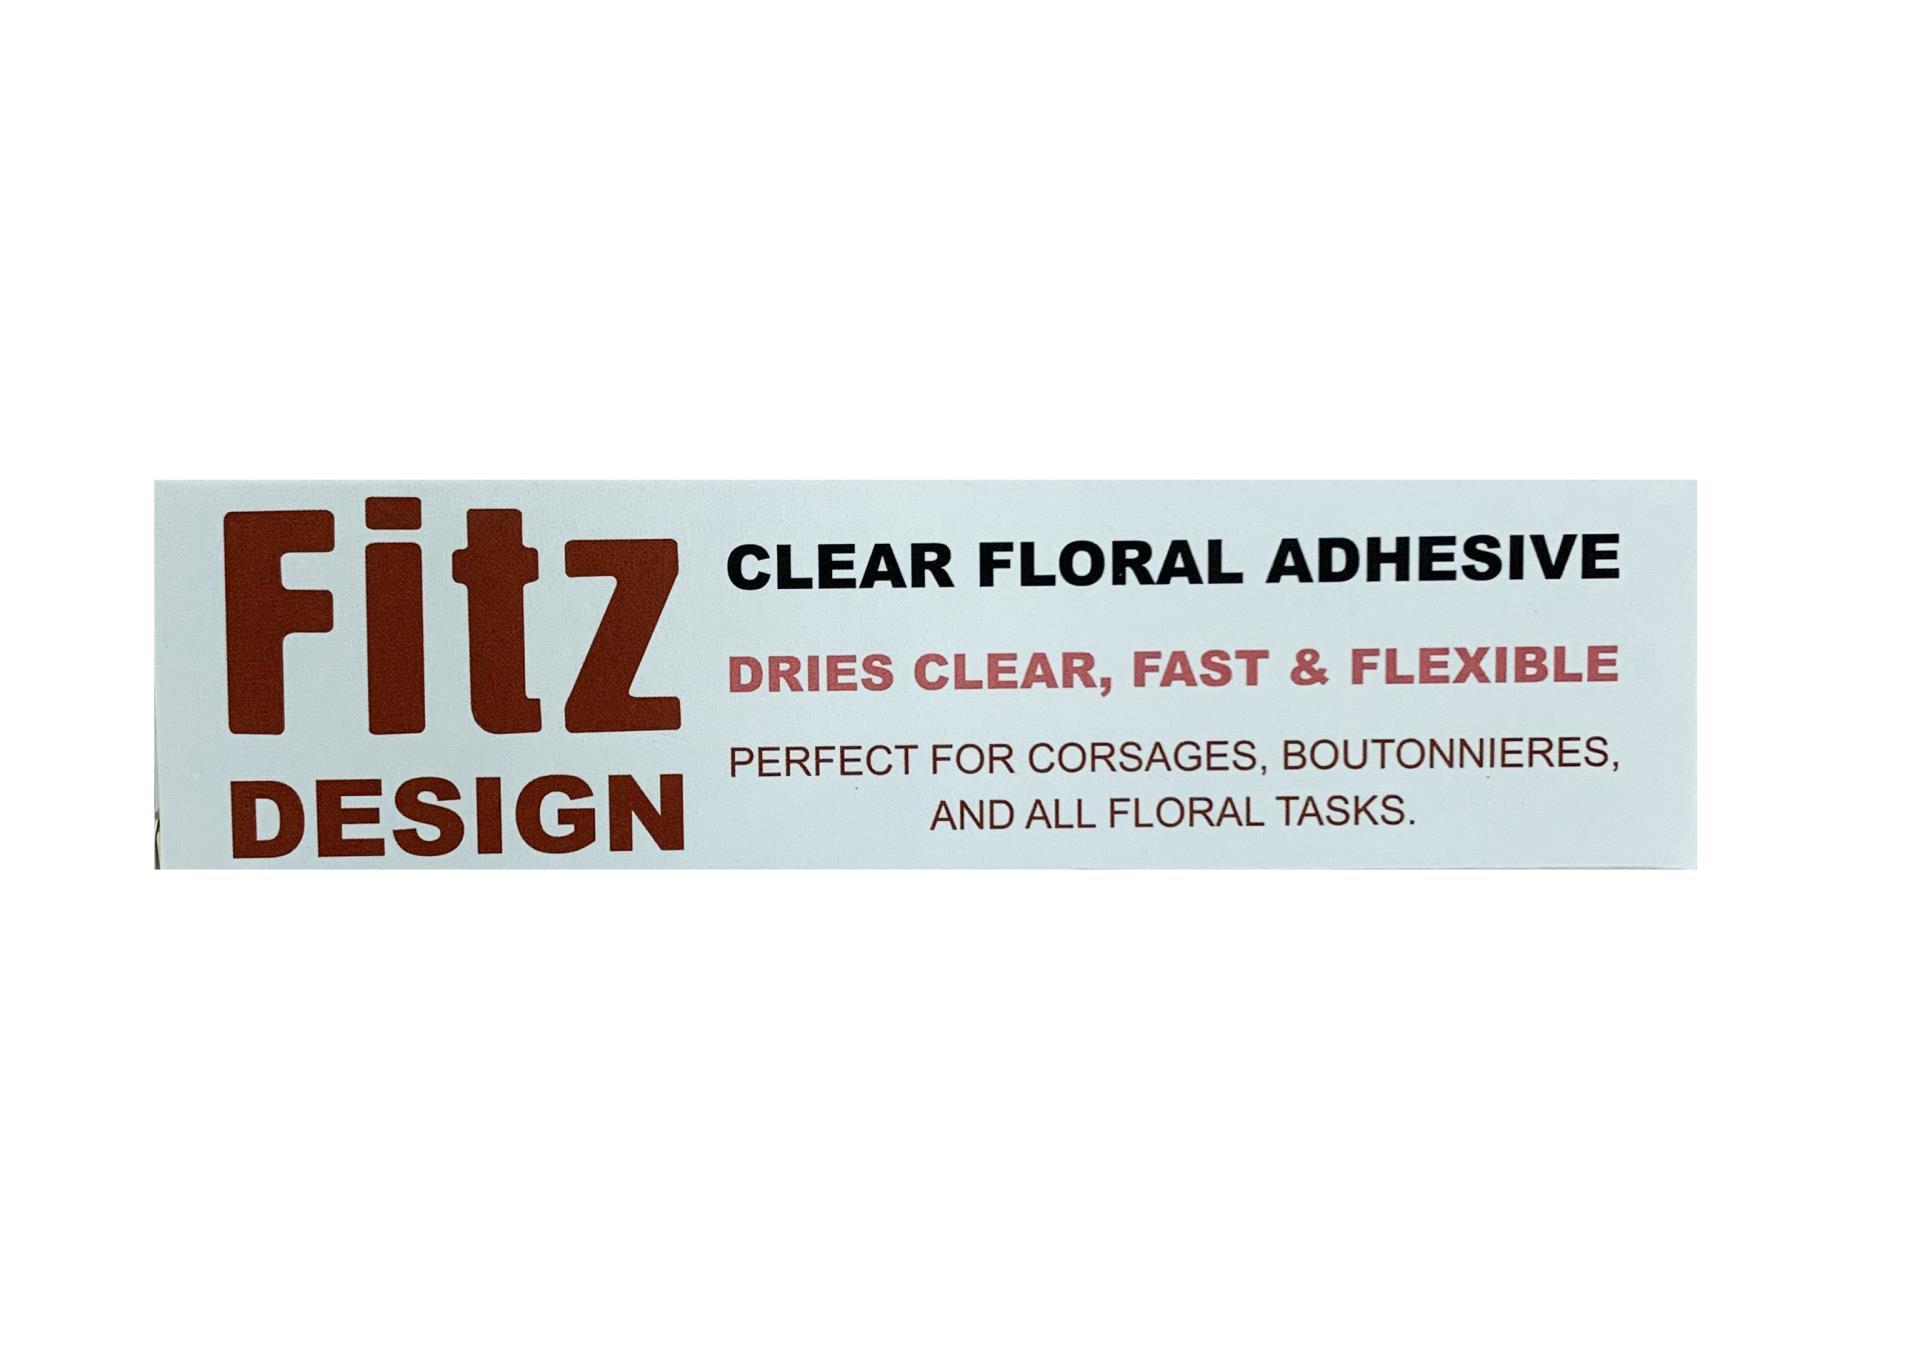 Floral Adhesive clear